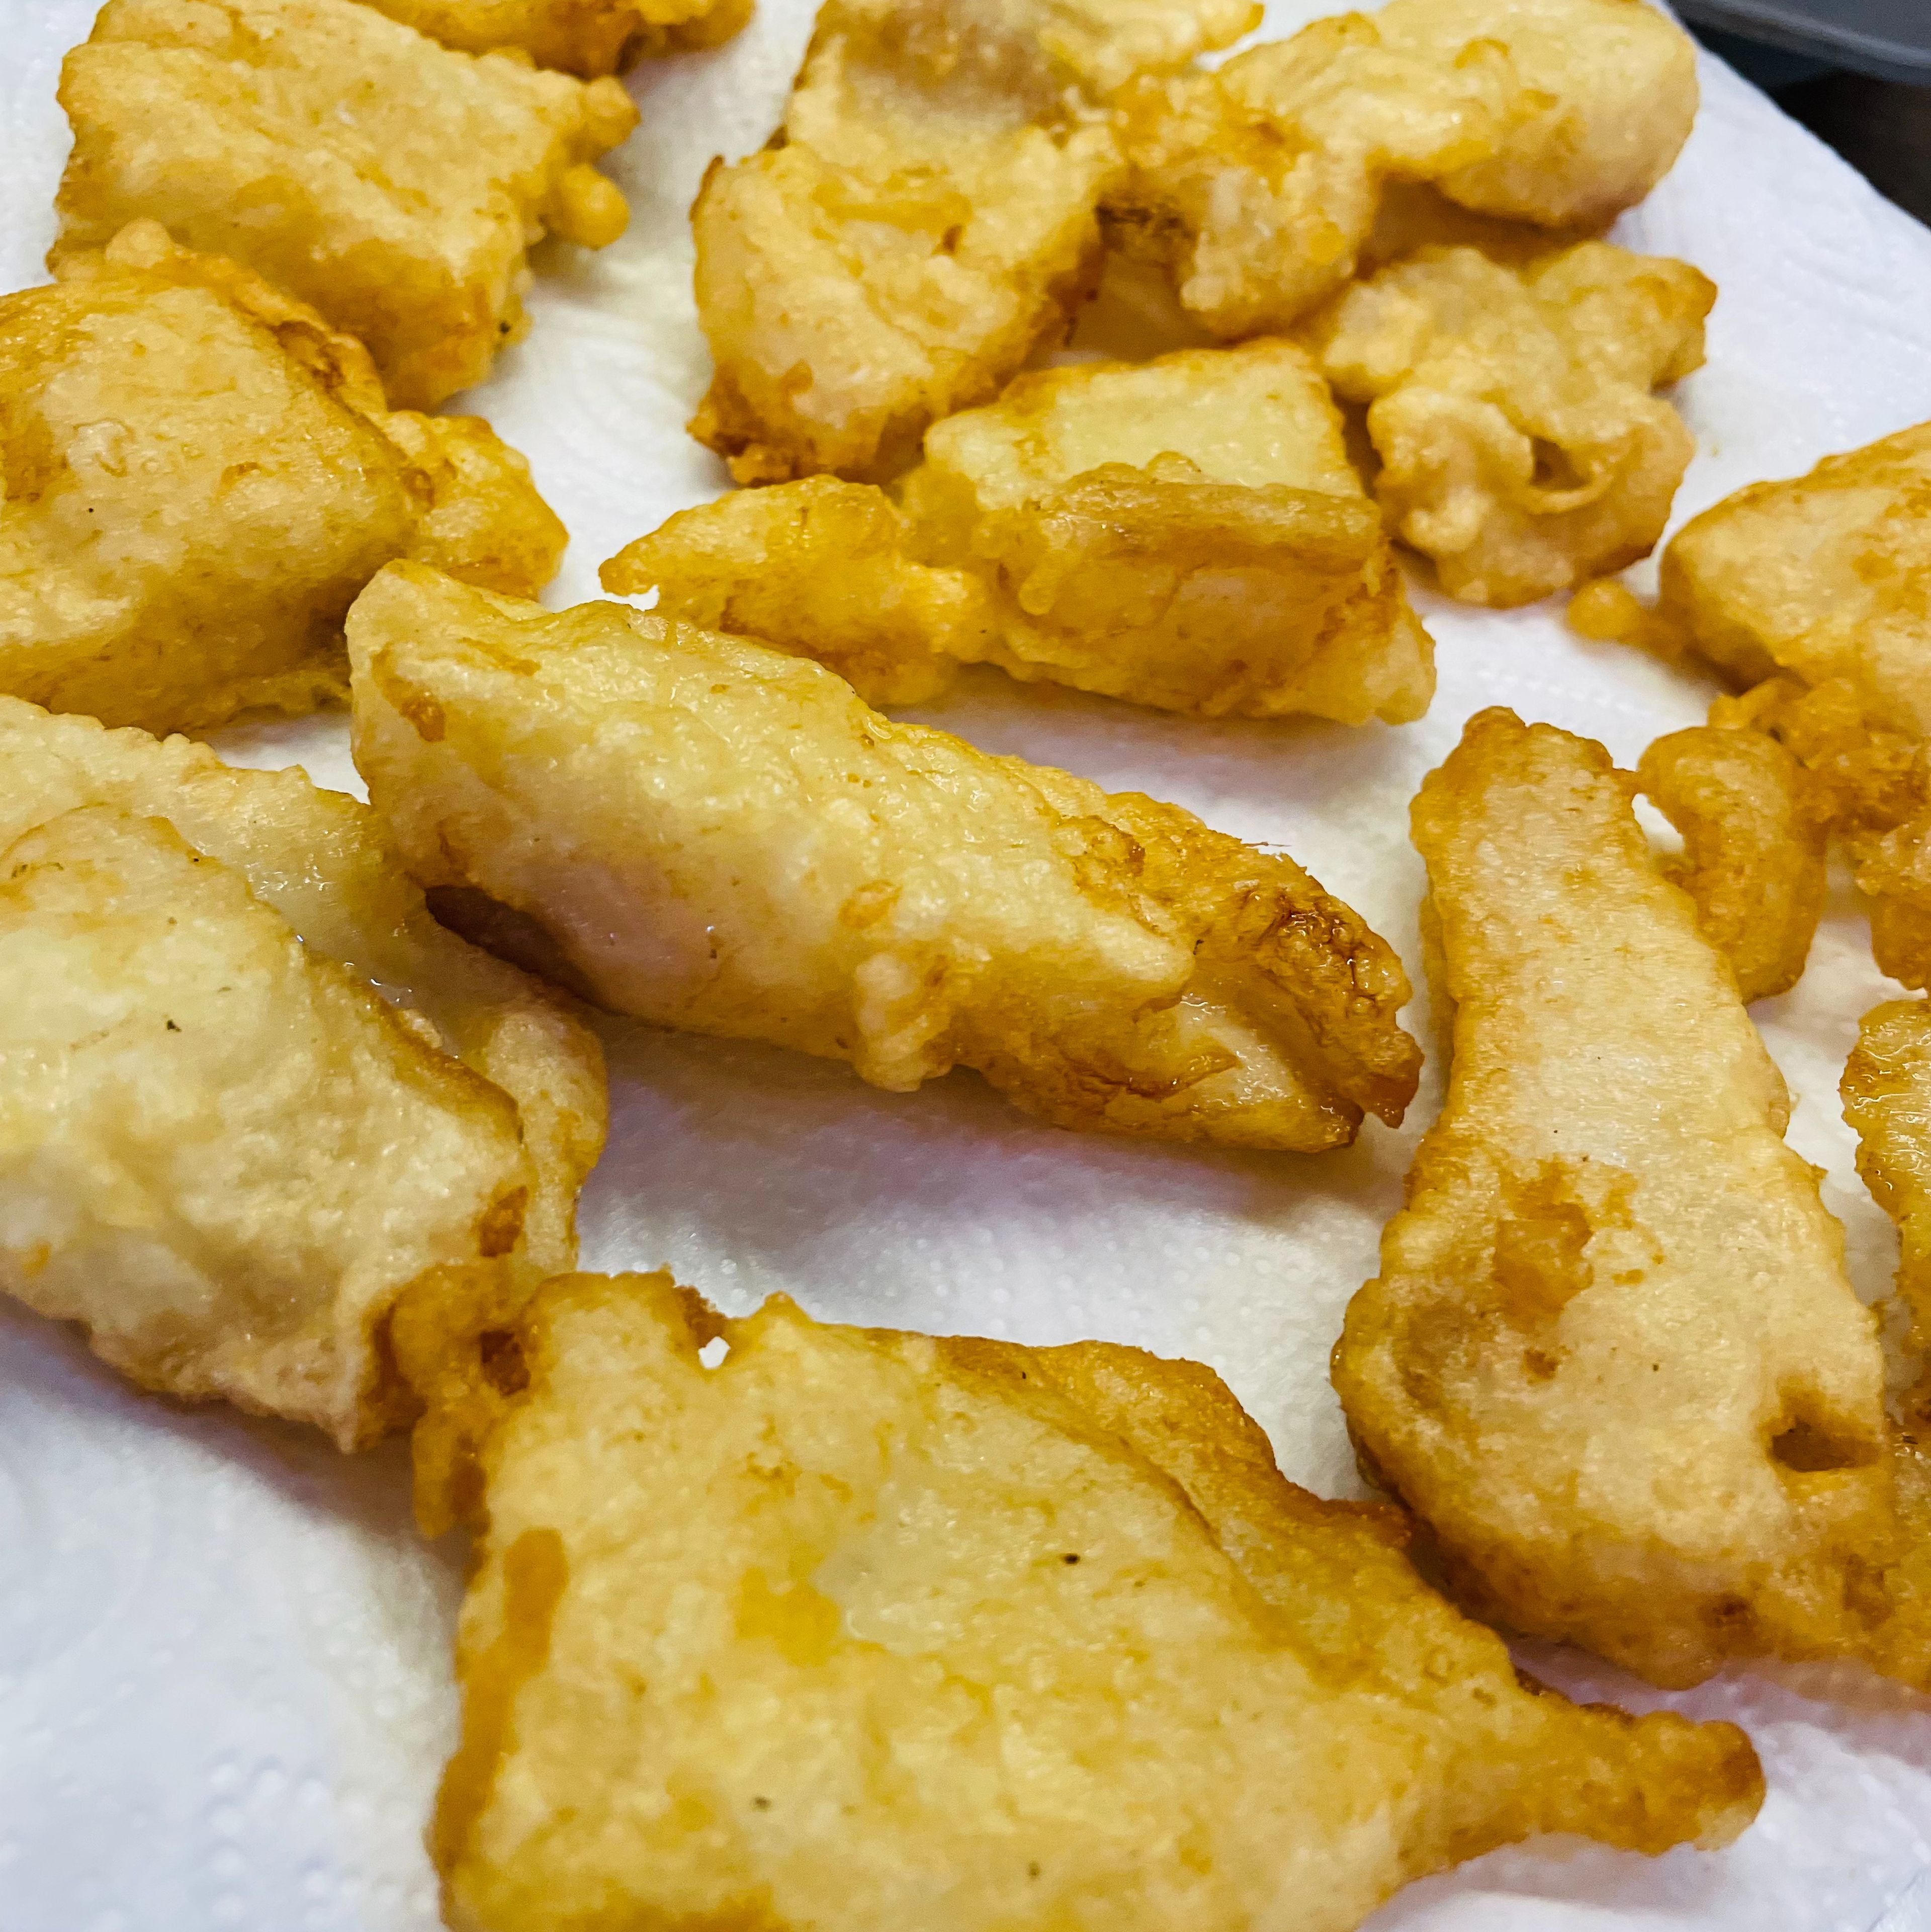 Fry fish until golden brown and set a side